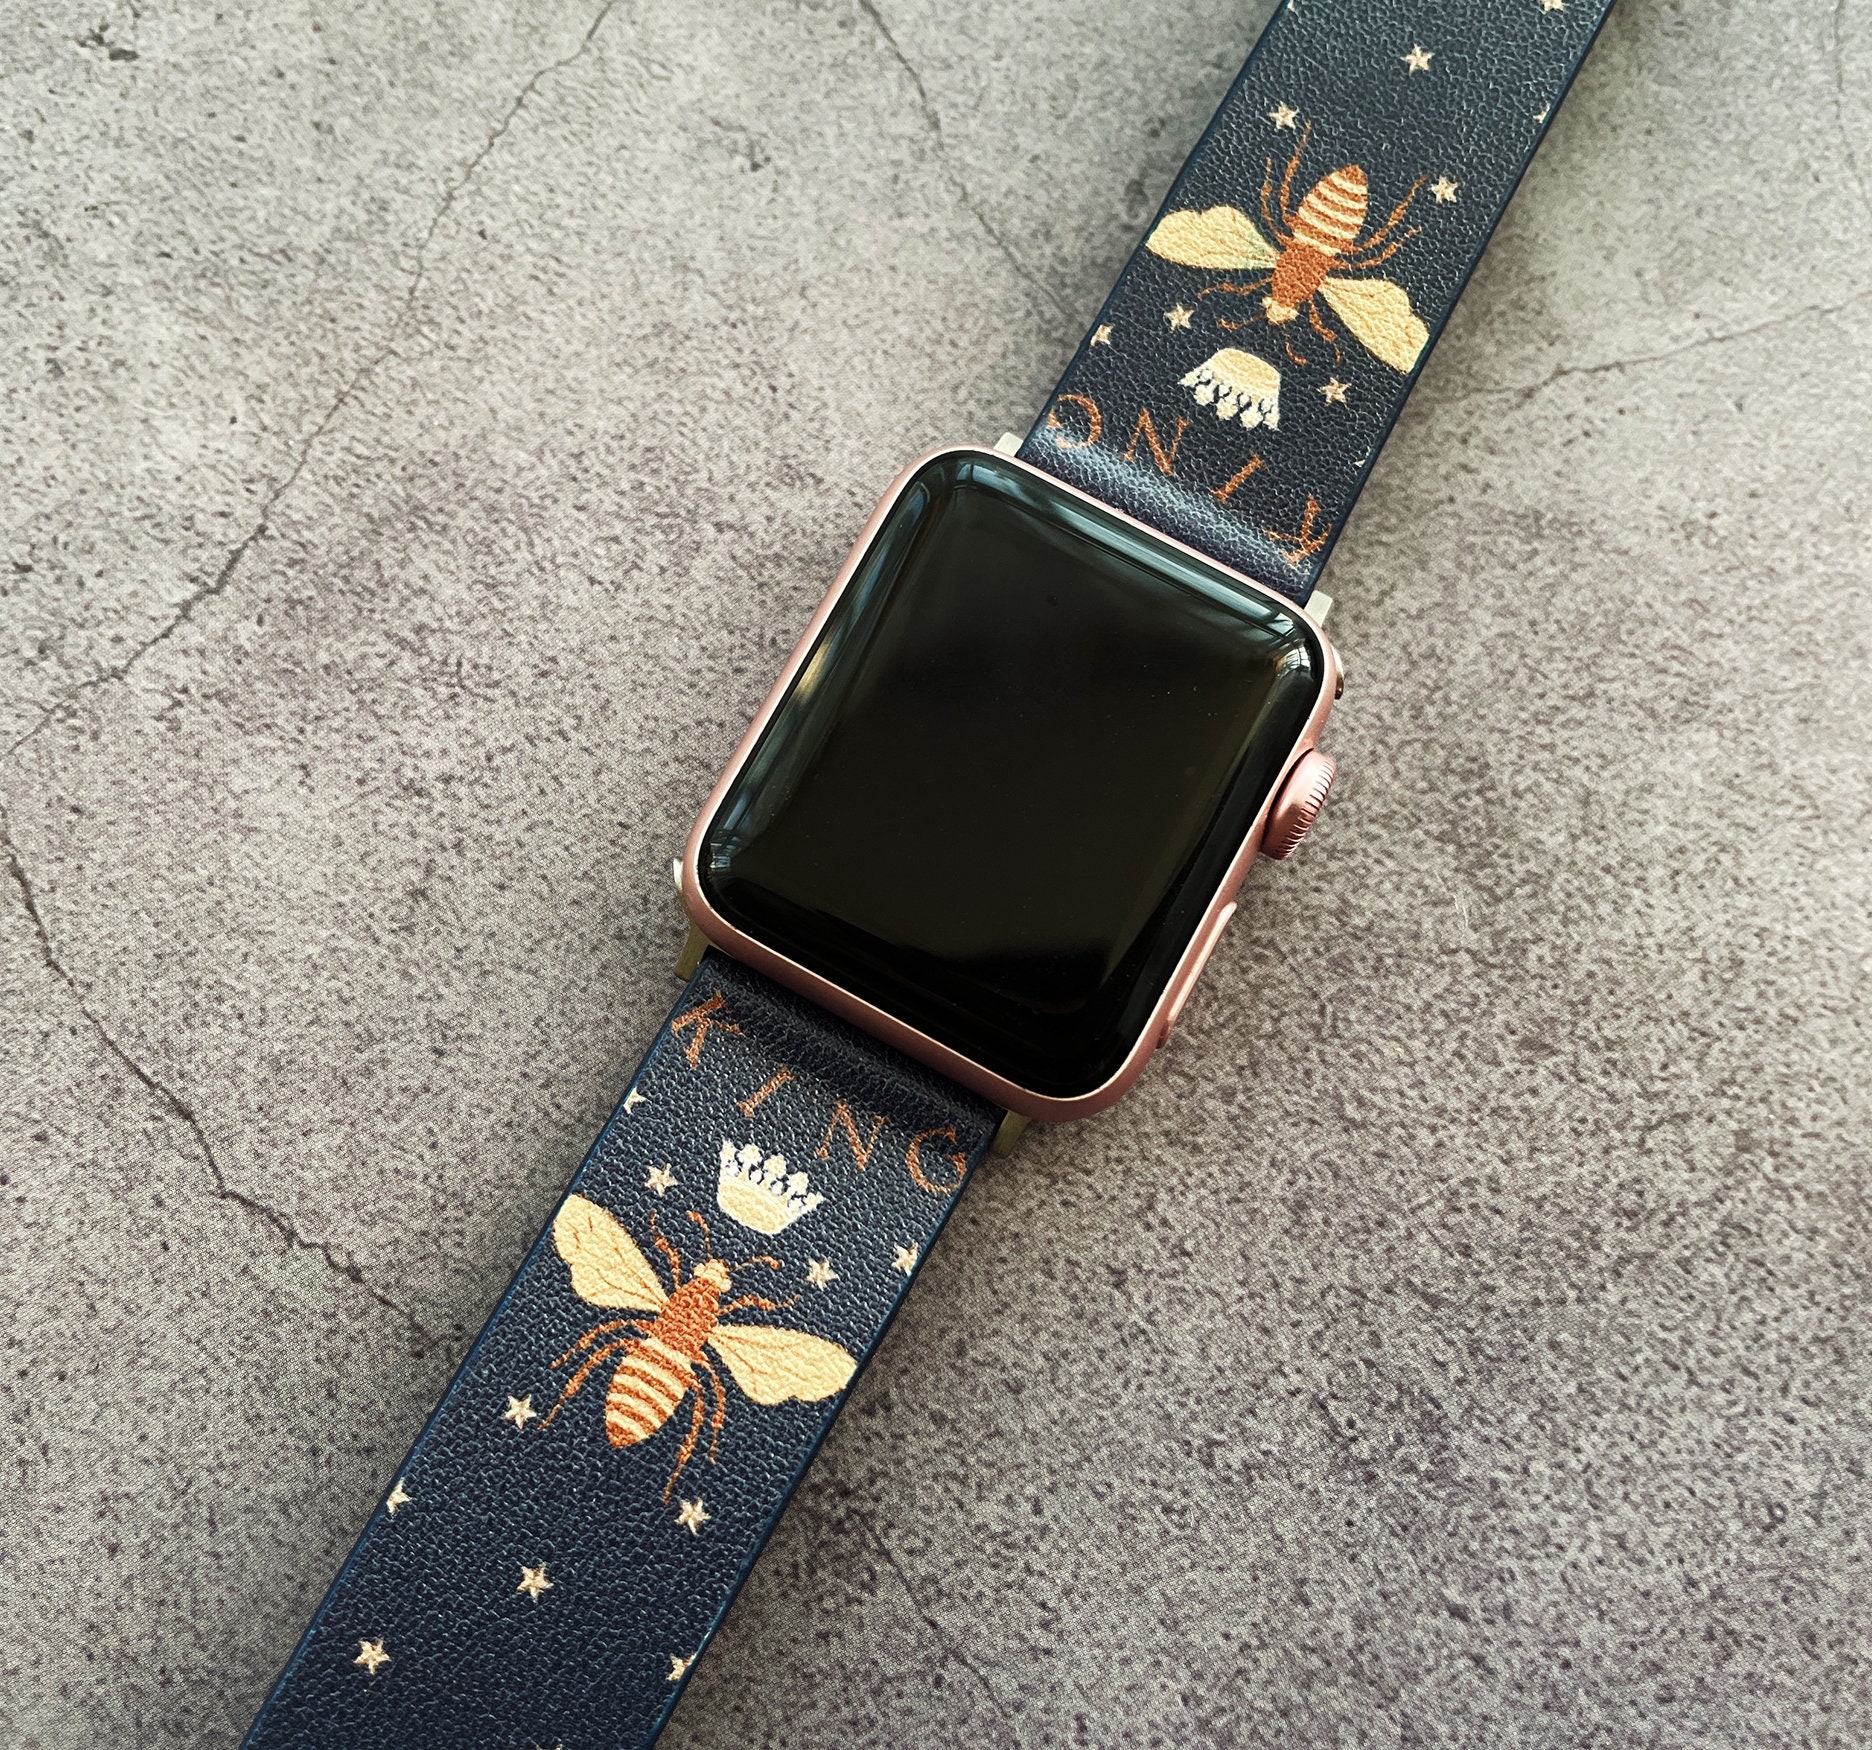 Burberry Apple Watch Band - Etsy